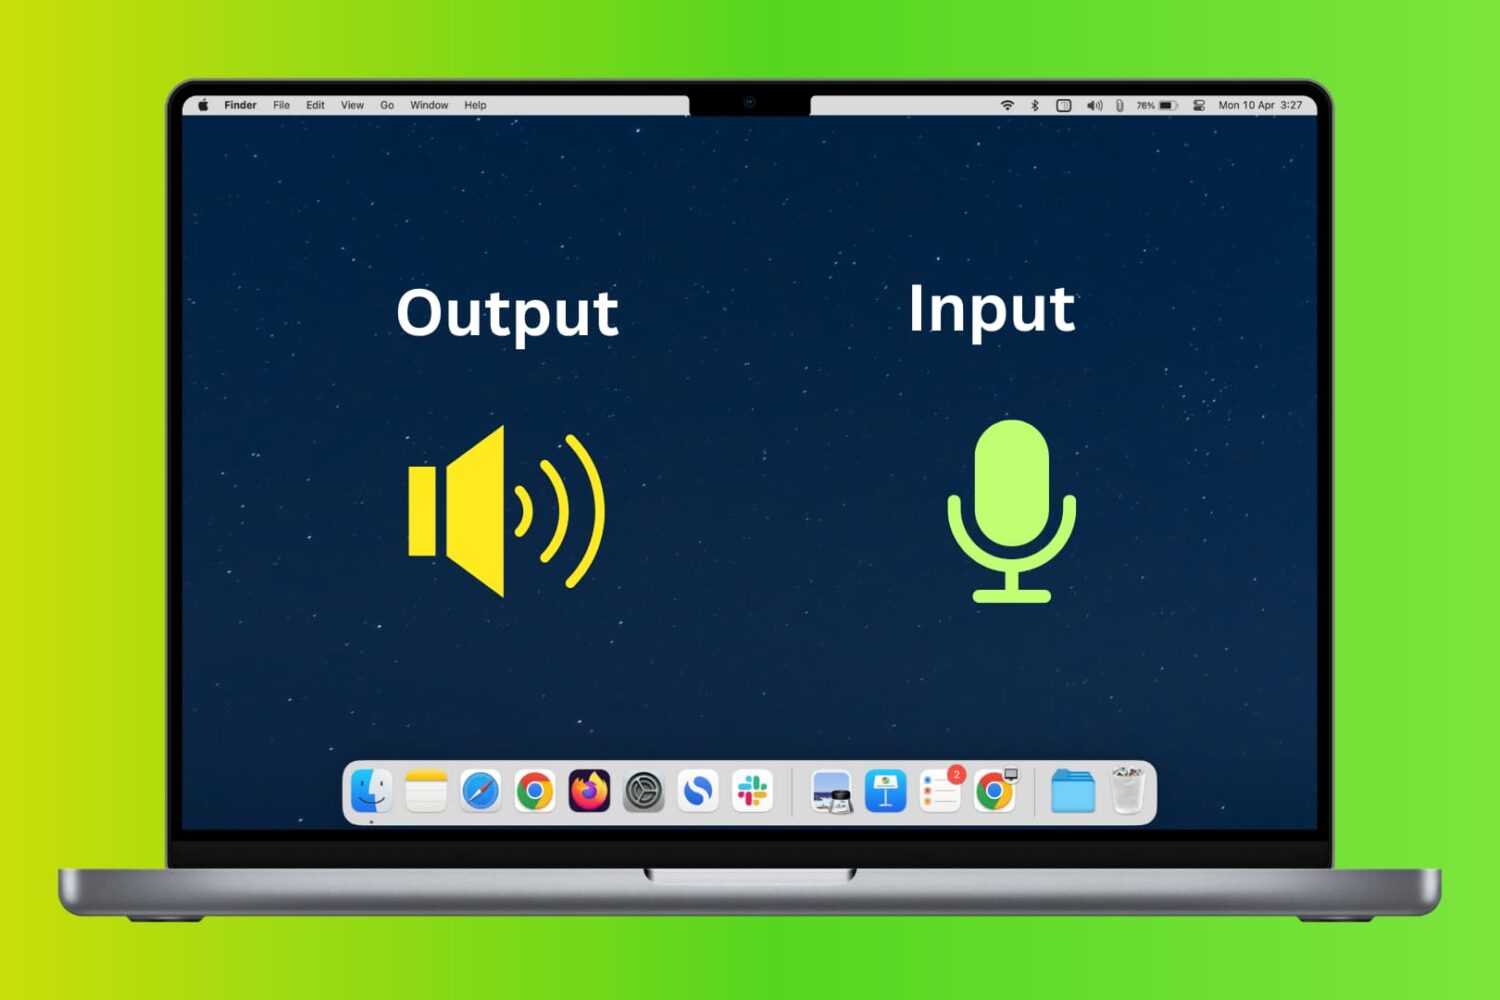 Audio output and input on Mac